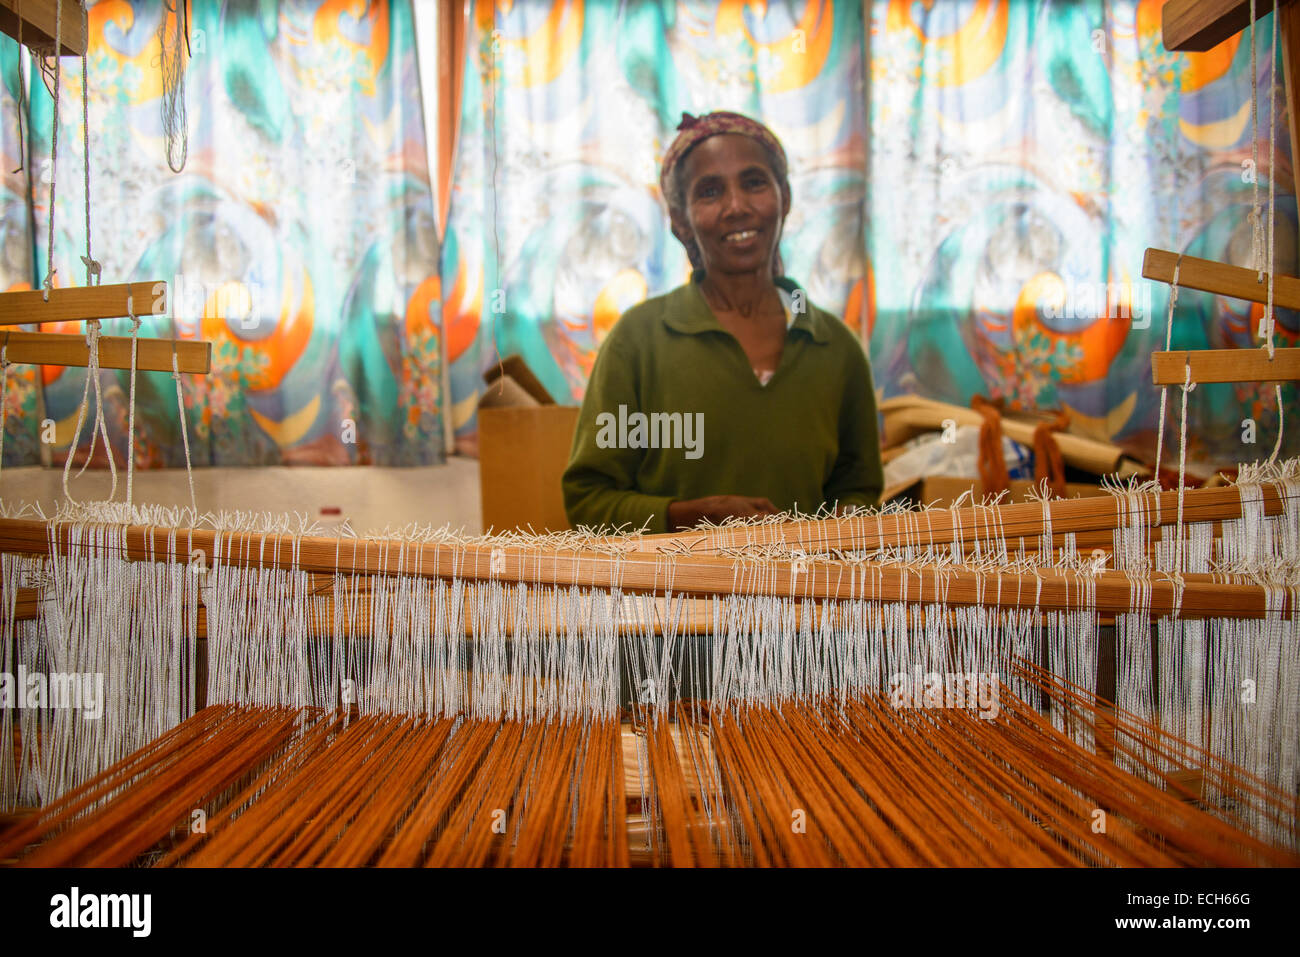 Friendly woman working on a hand weaving loom on social project, Eritrea Stock Photo